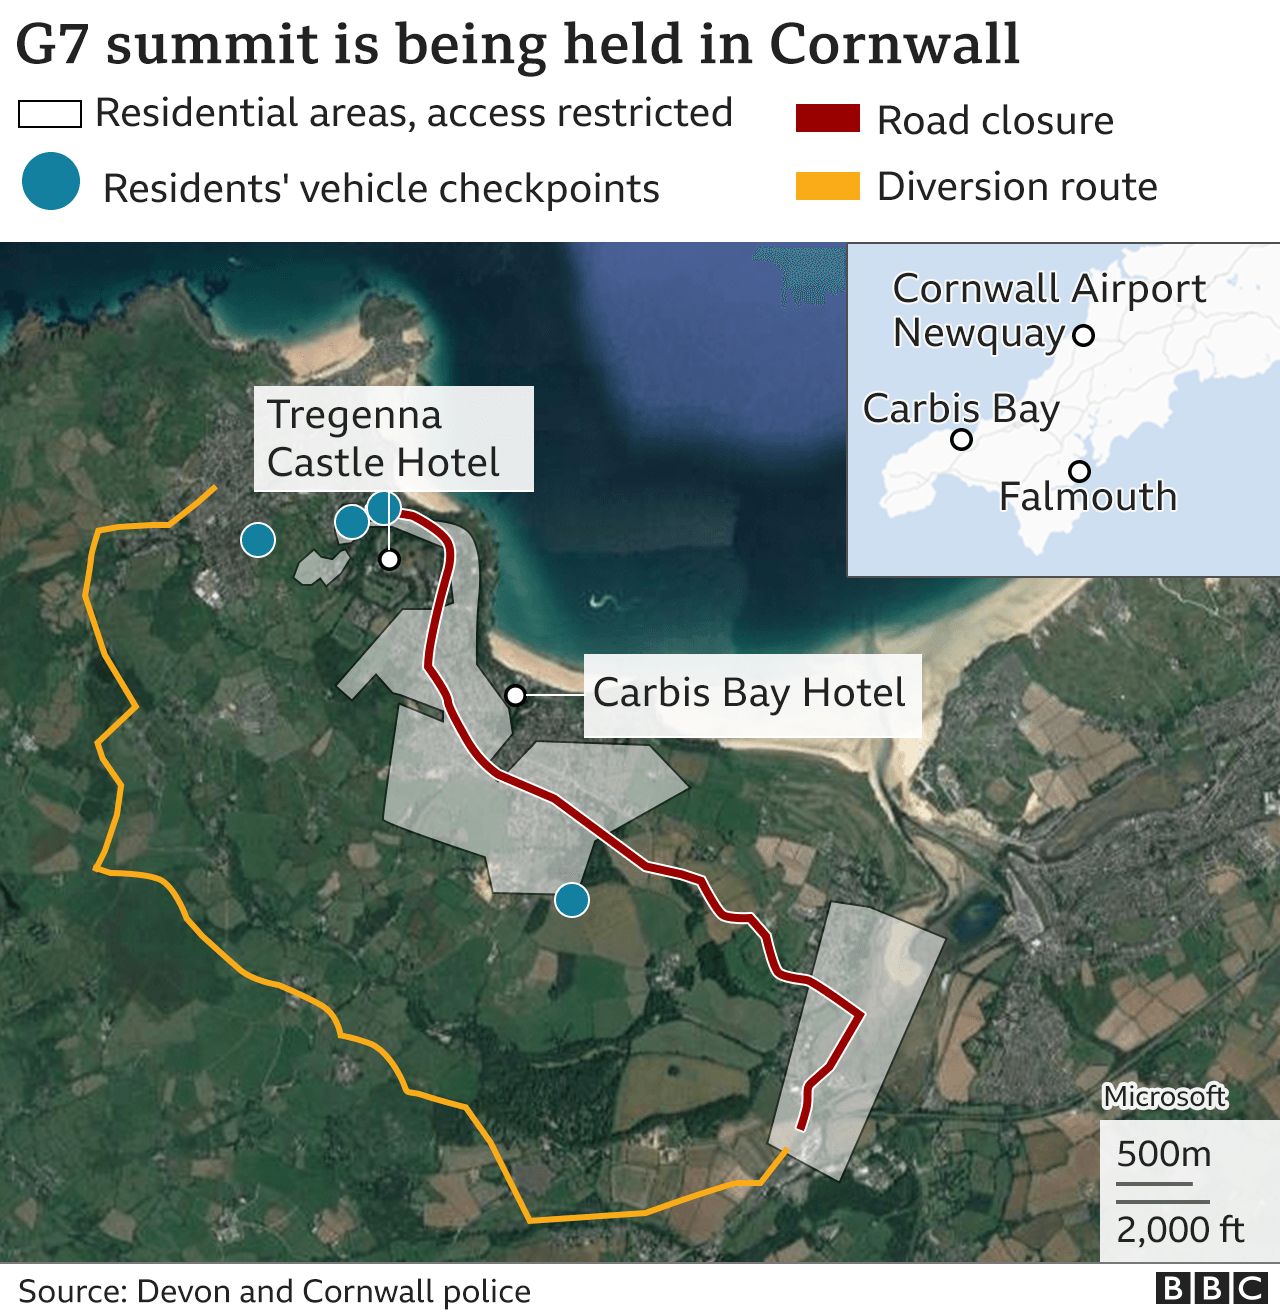 A map of Carbis Bay in north Cornwall